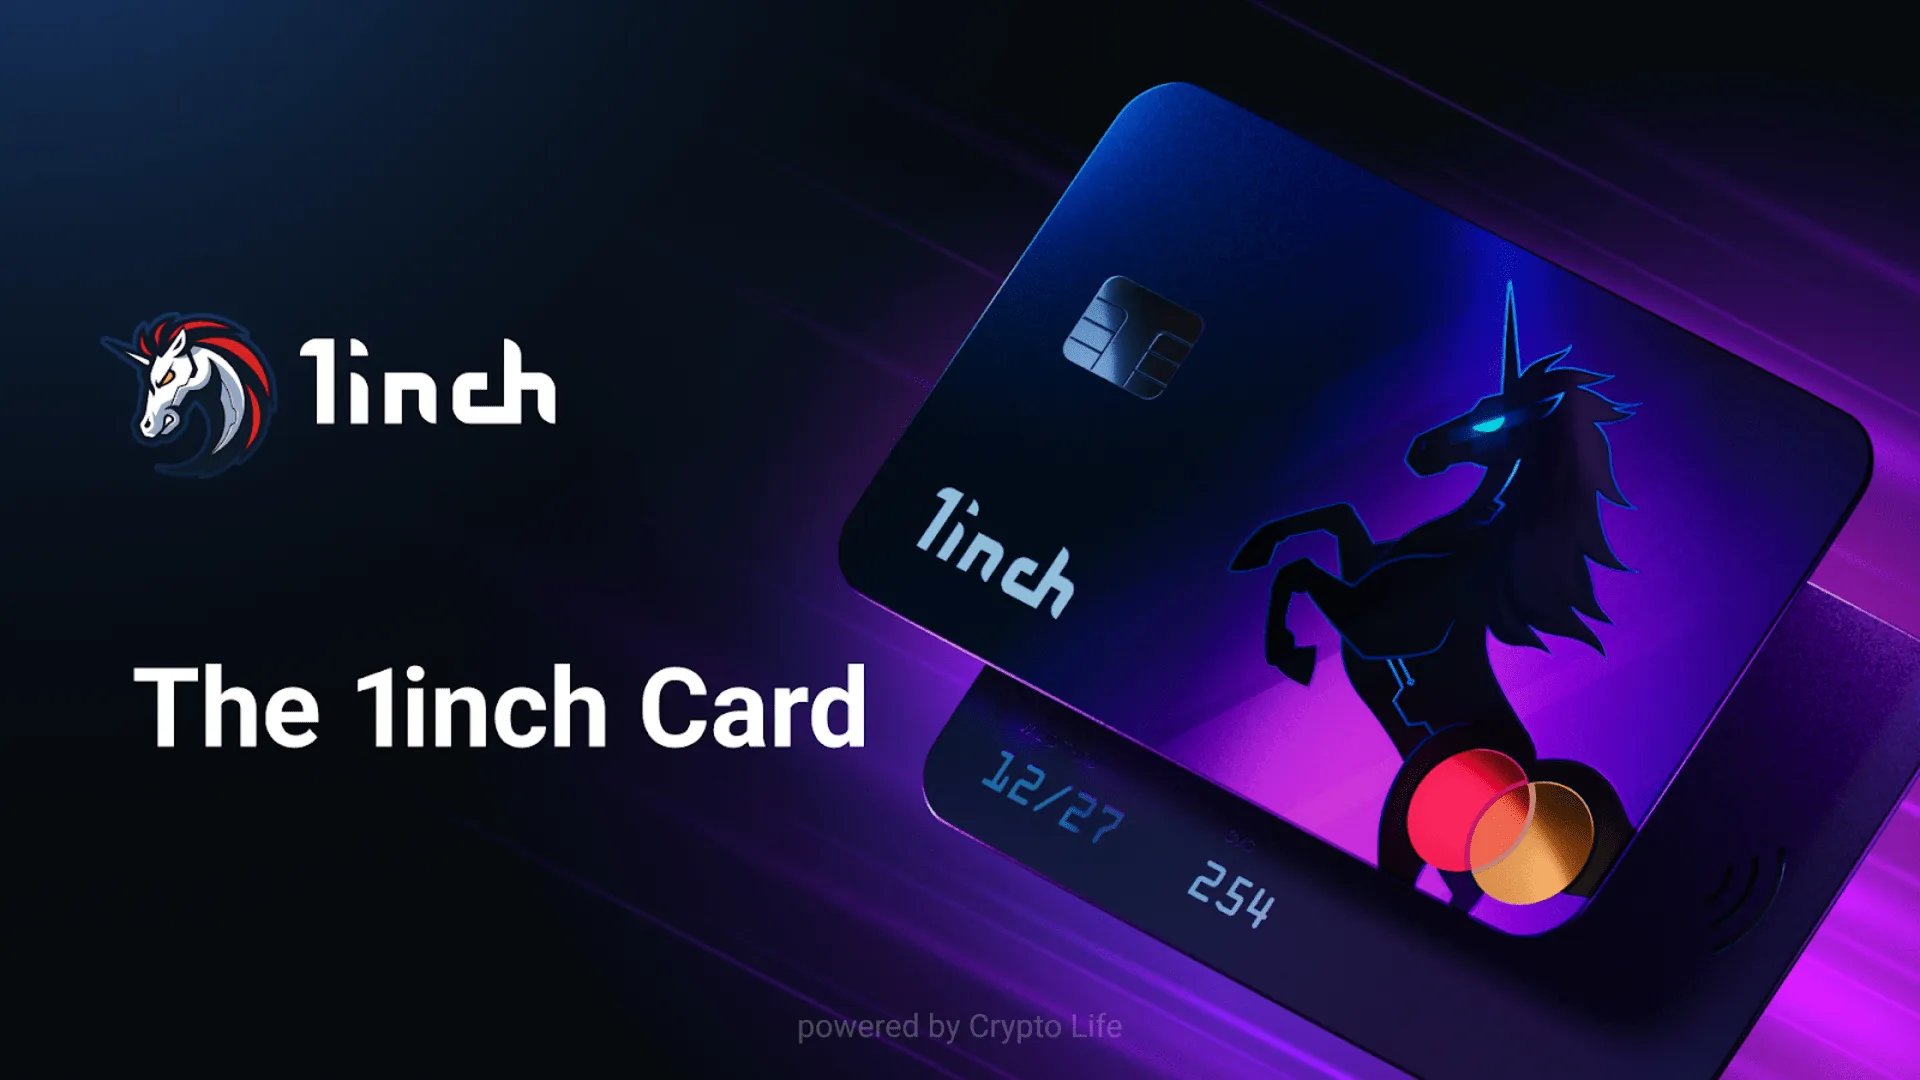 1inch launches Web3 debit card in partnership with Mastercard and Crypto Life